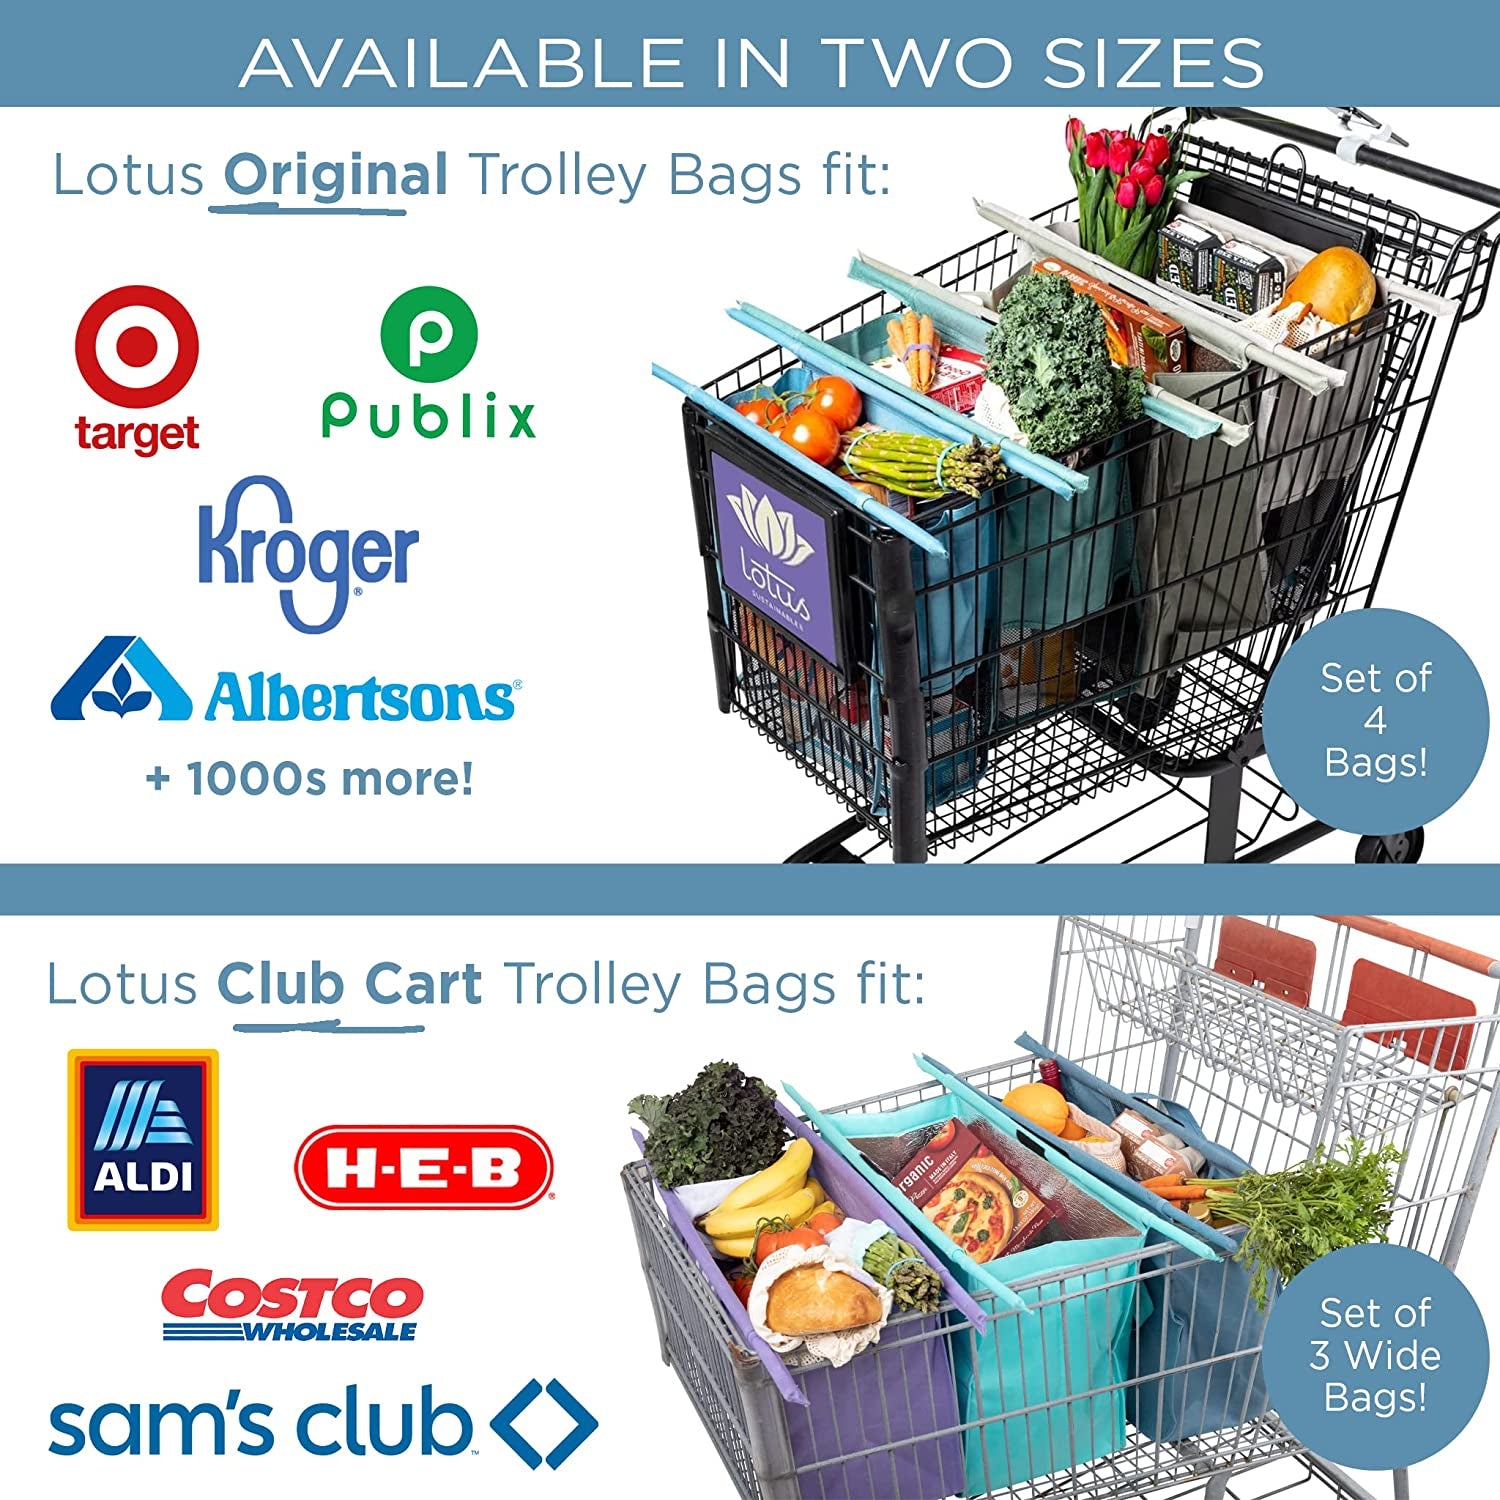 Grocery Store Reusable Easy Cart and Pack Set of 4 -W/Lrg COOLER Bag & Egg/Wine Holder! Reusable Grocery Cart Bags Sized for USA. Washable Eco-Friendly 4-Bag Grocery Tote. (Earth Tones)